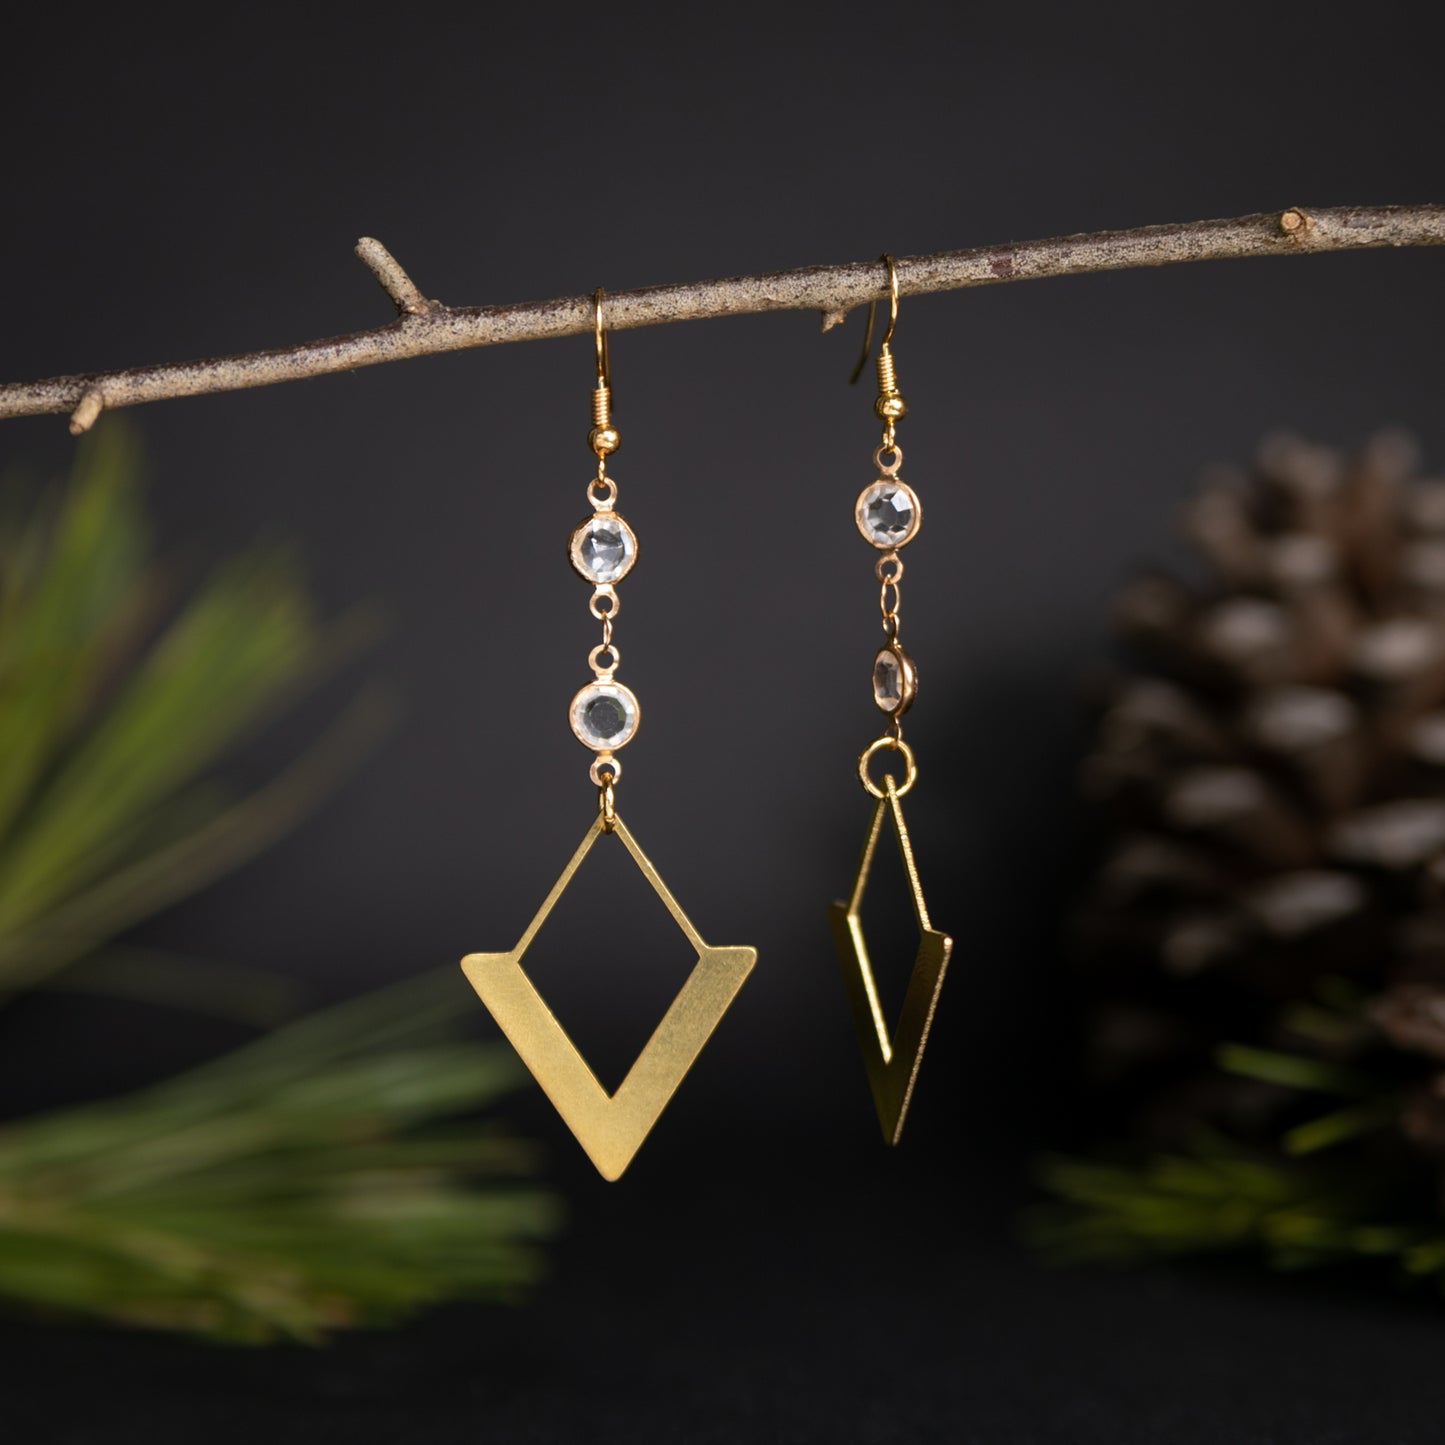 Gold Point Earrings with Rhinestones